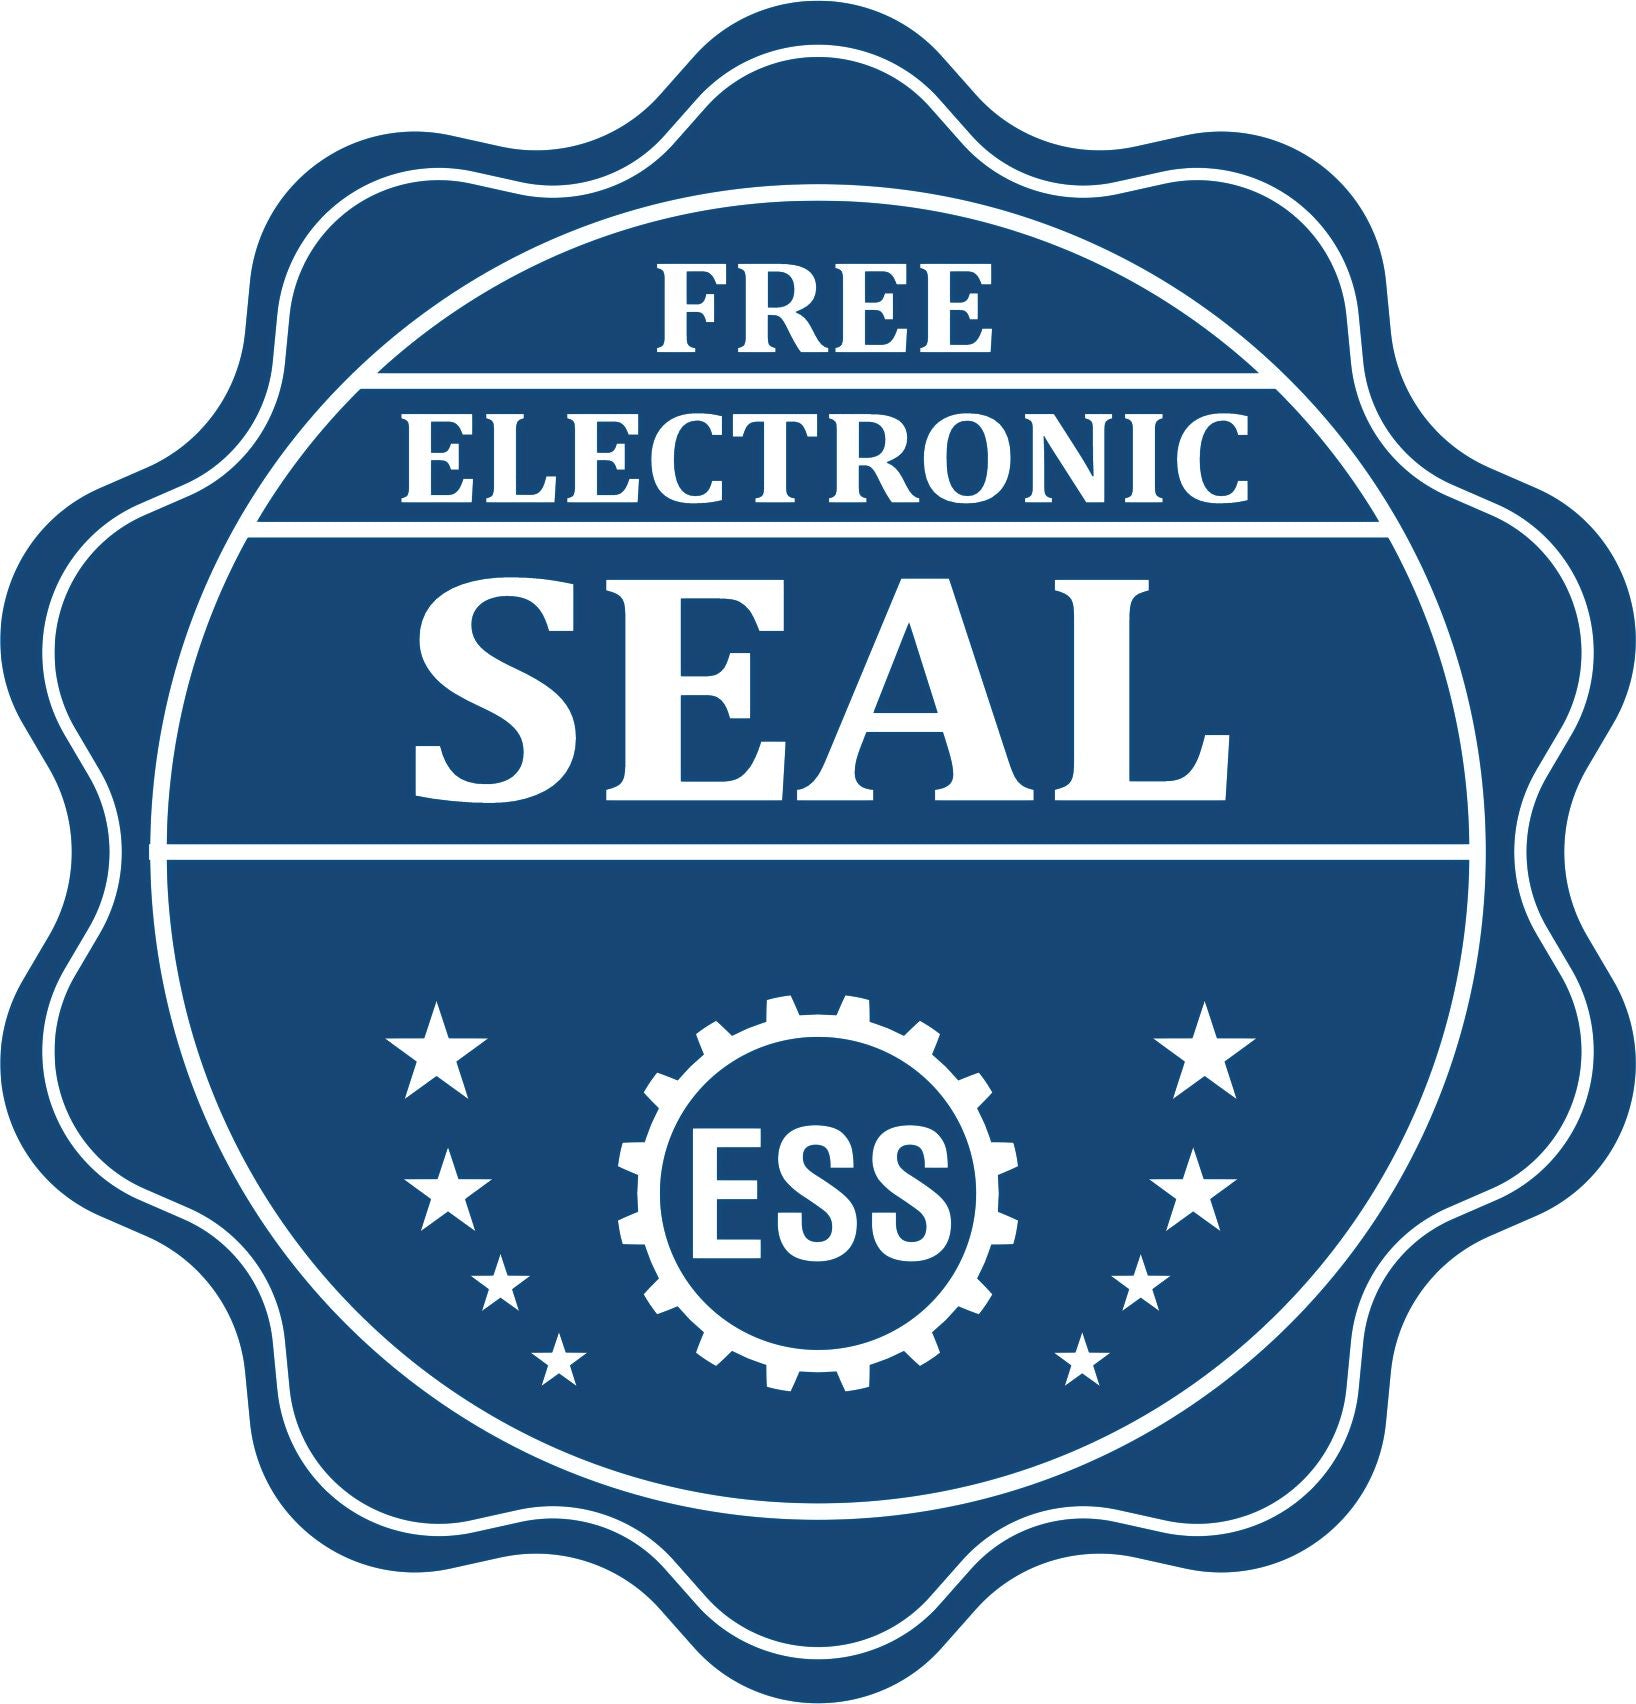 A badge showing a free electronic seal for the Long Reach Tennessee Land Surveyor Seal with stars and the ESS gear on the emblem.